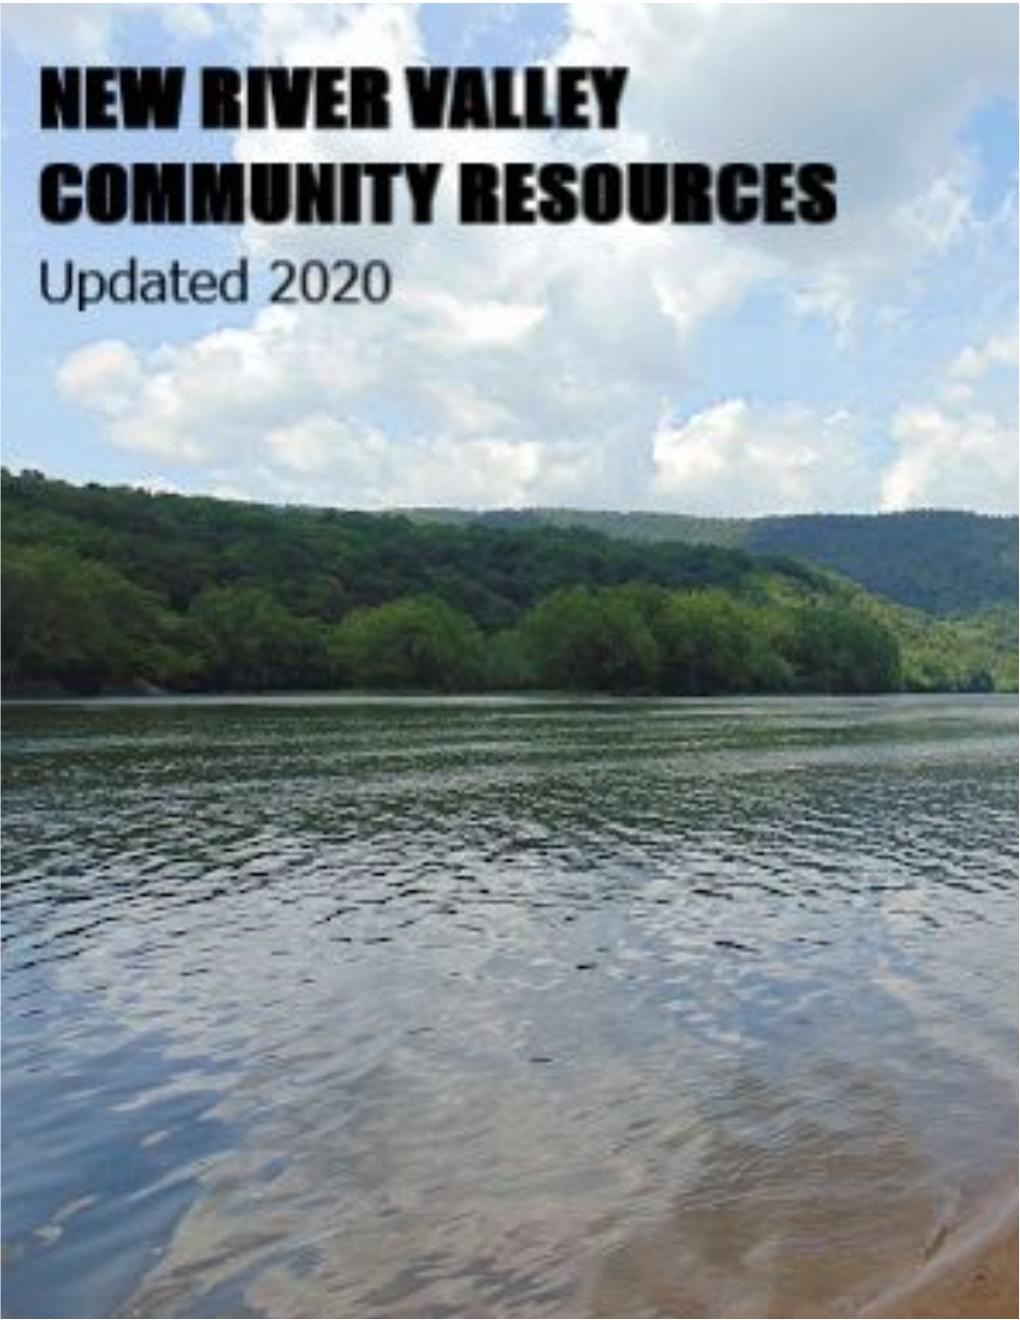 New River Valley Community Resources Updated 2020